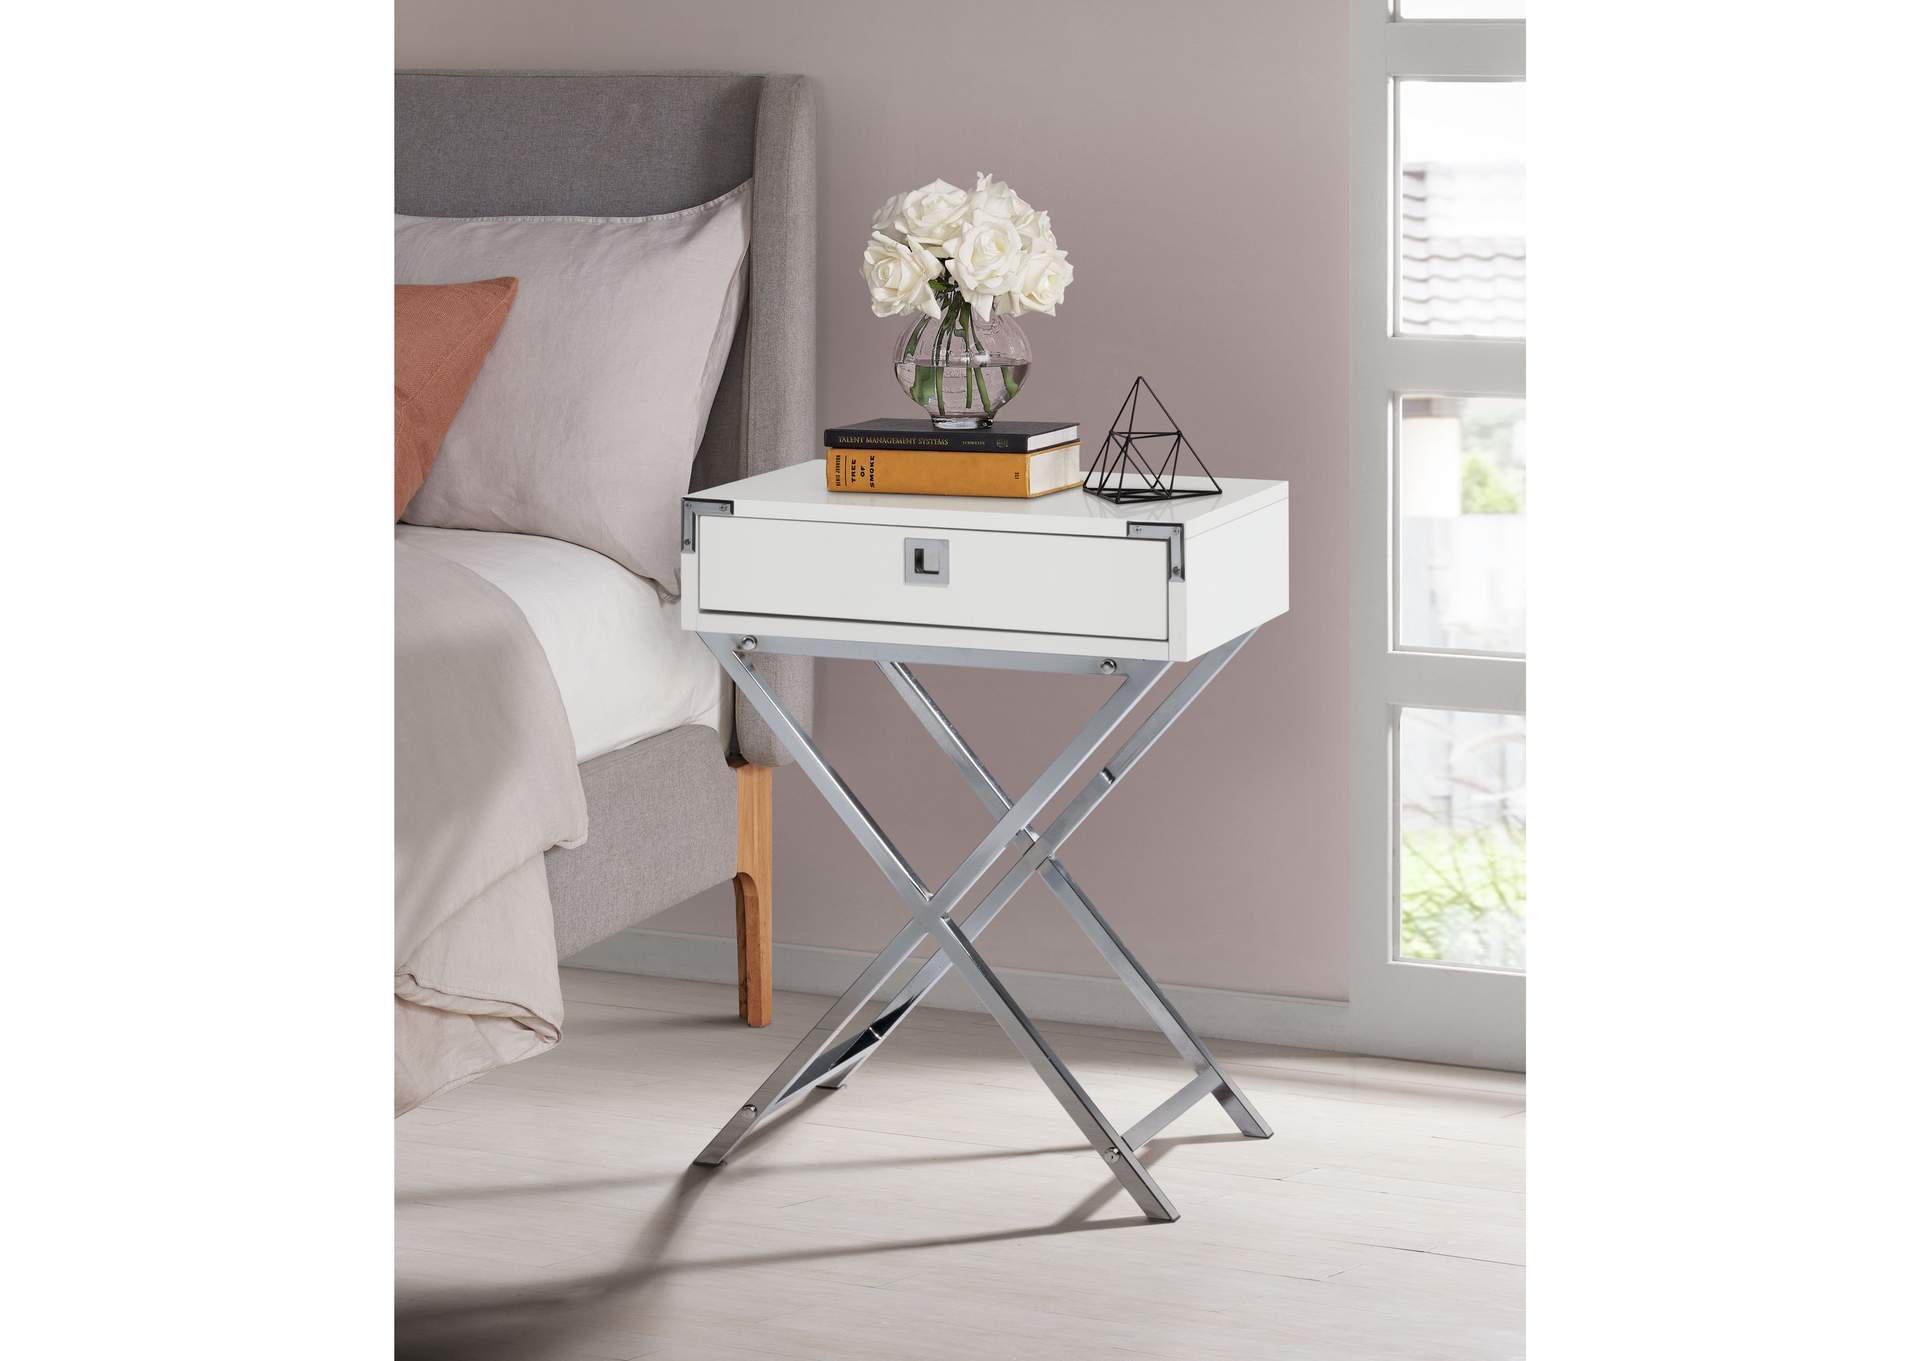 Lainey Accent Nightstand With White Top In Chrome,Elements